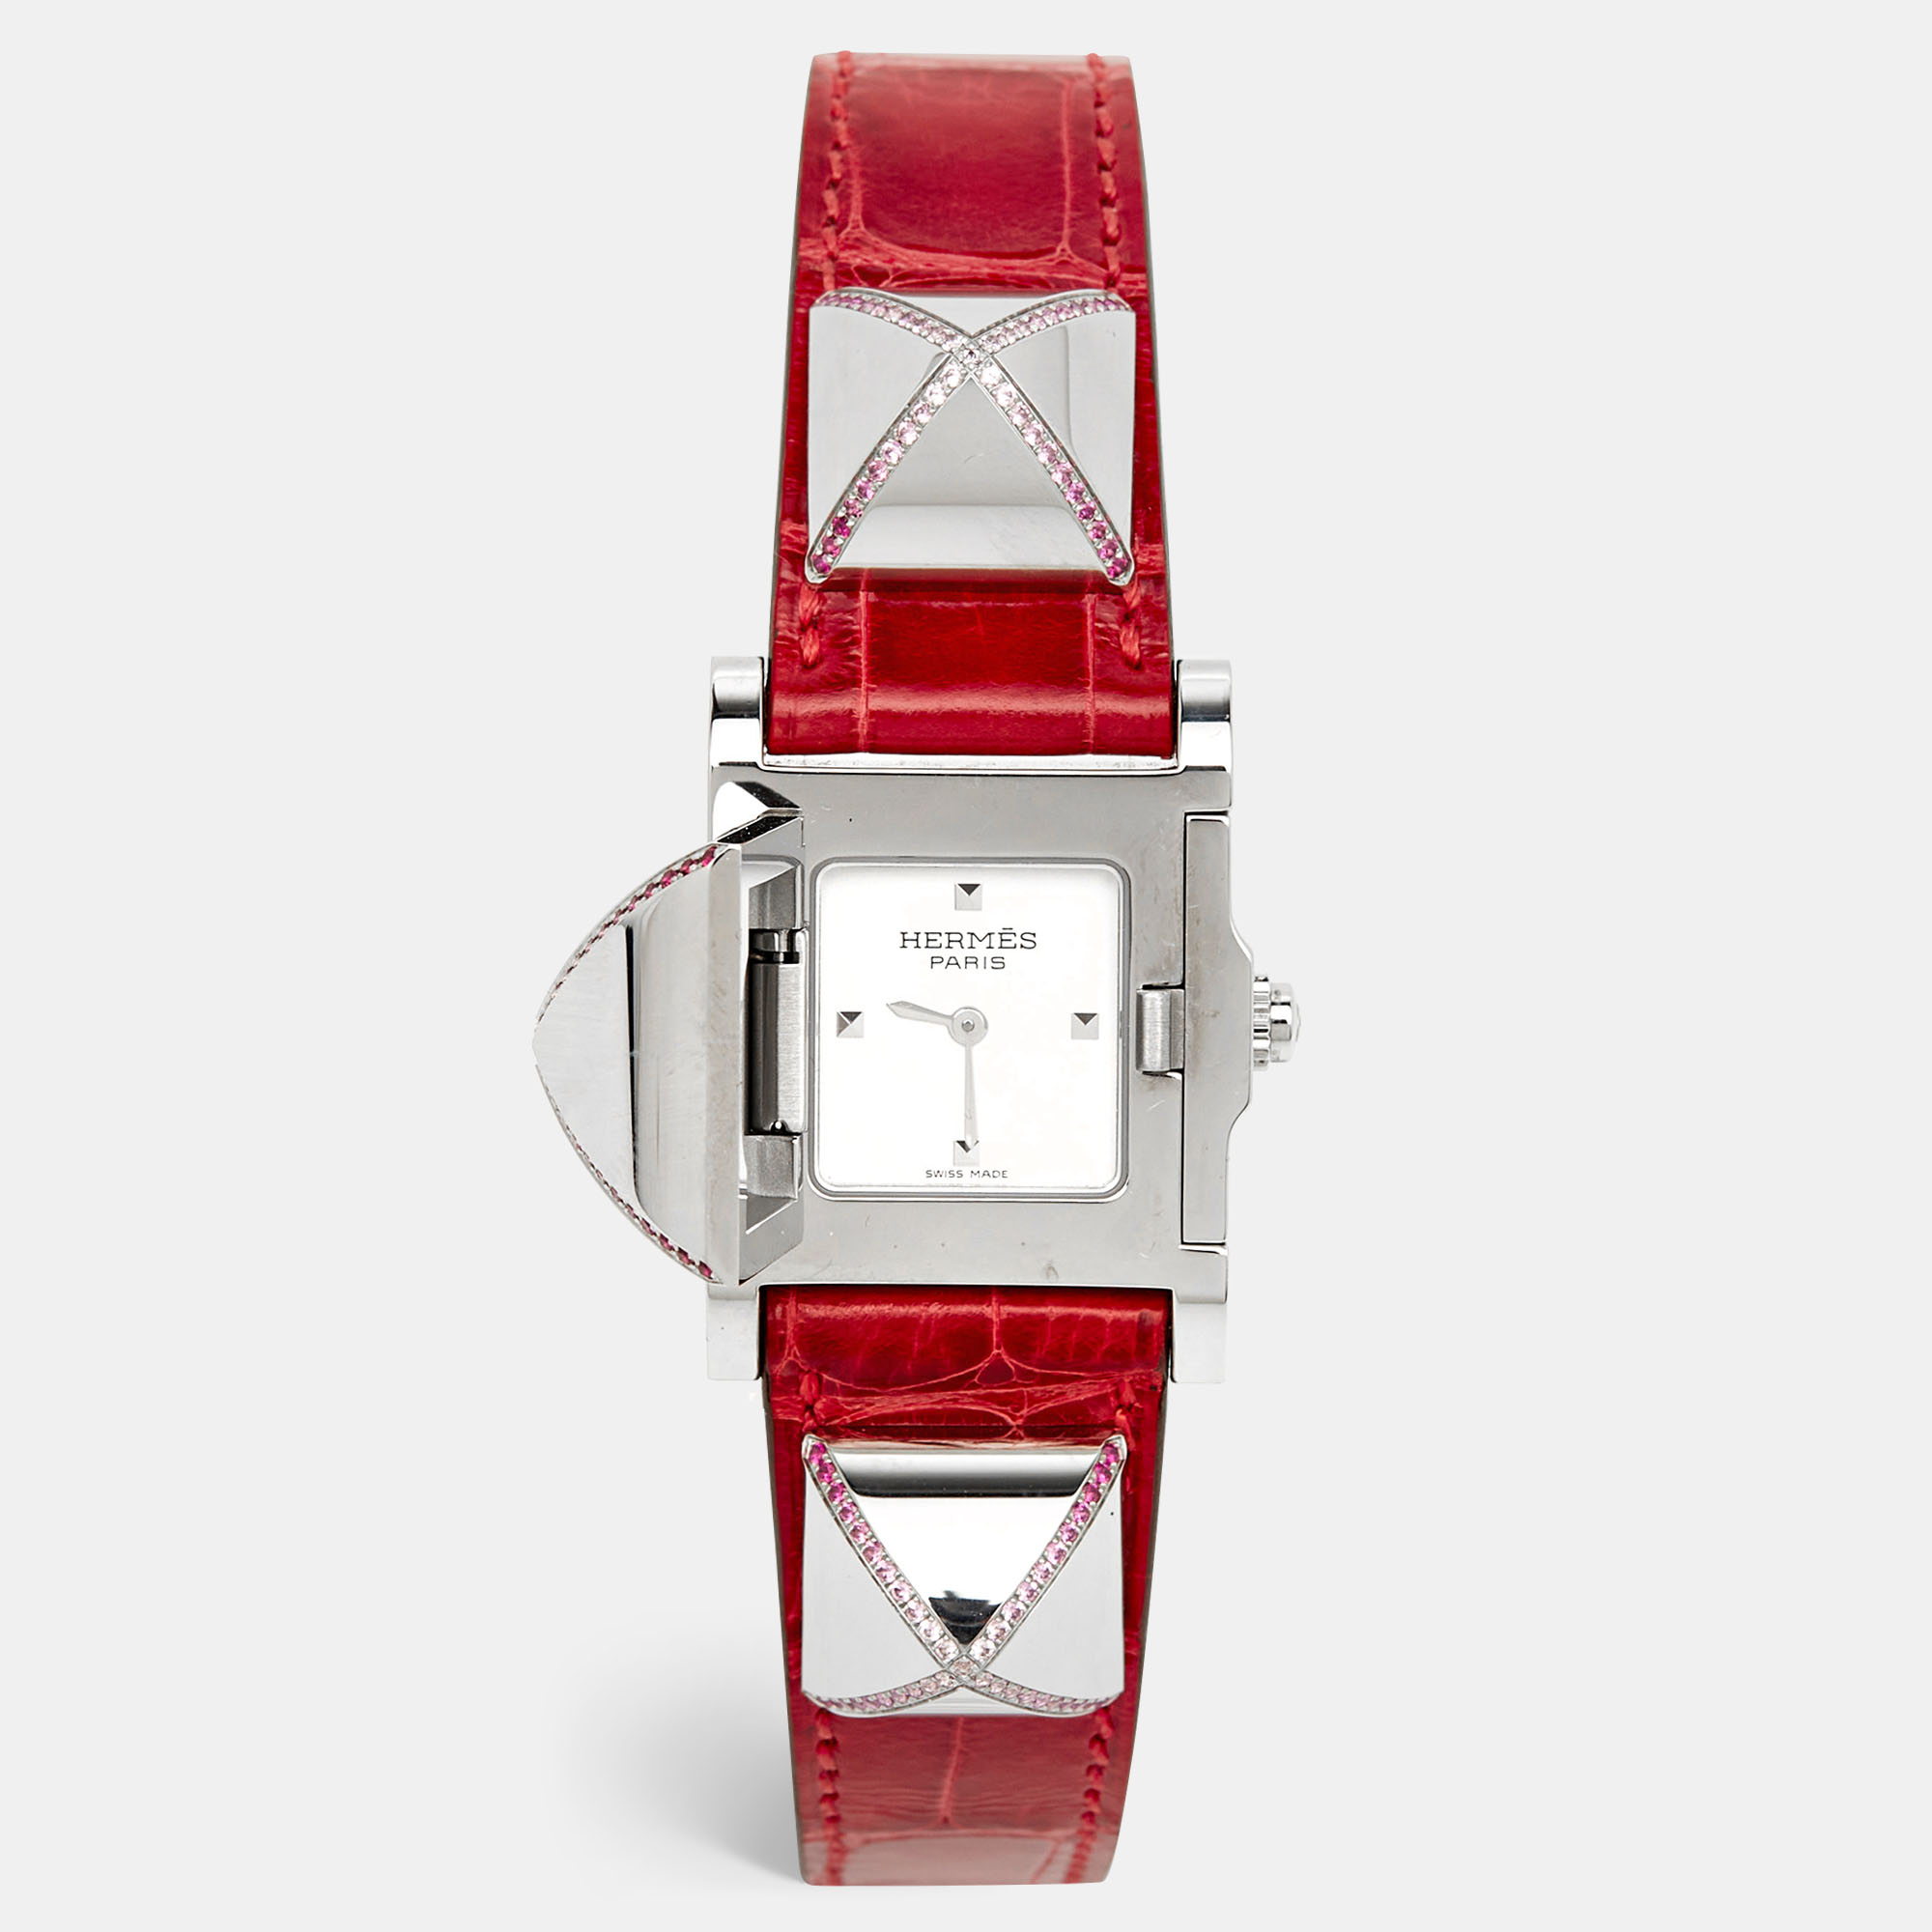 

Hermes Silver Stainless Steel Alligator Leather Pink Sapphire Medor ME3.234 Women's Wristwatch, Red